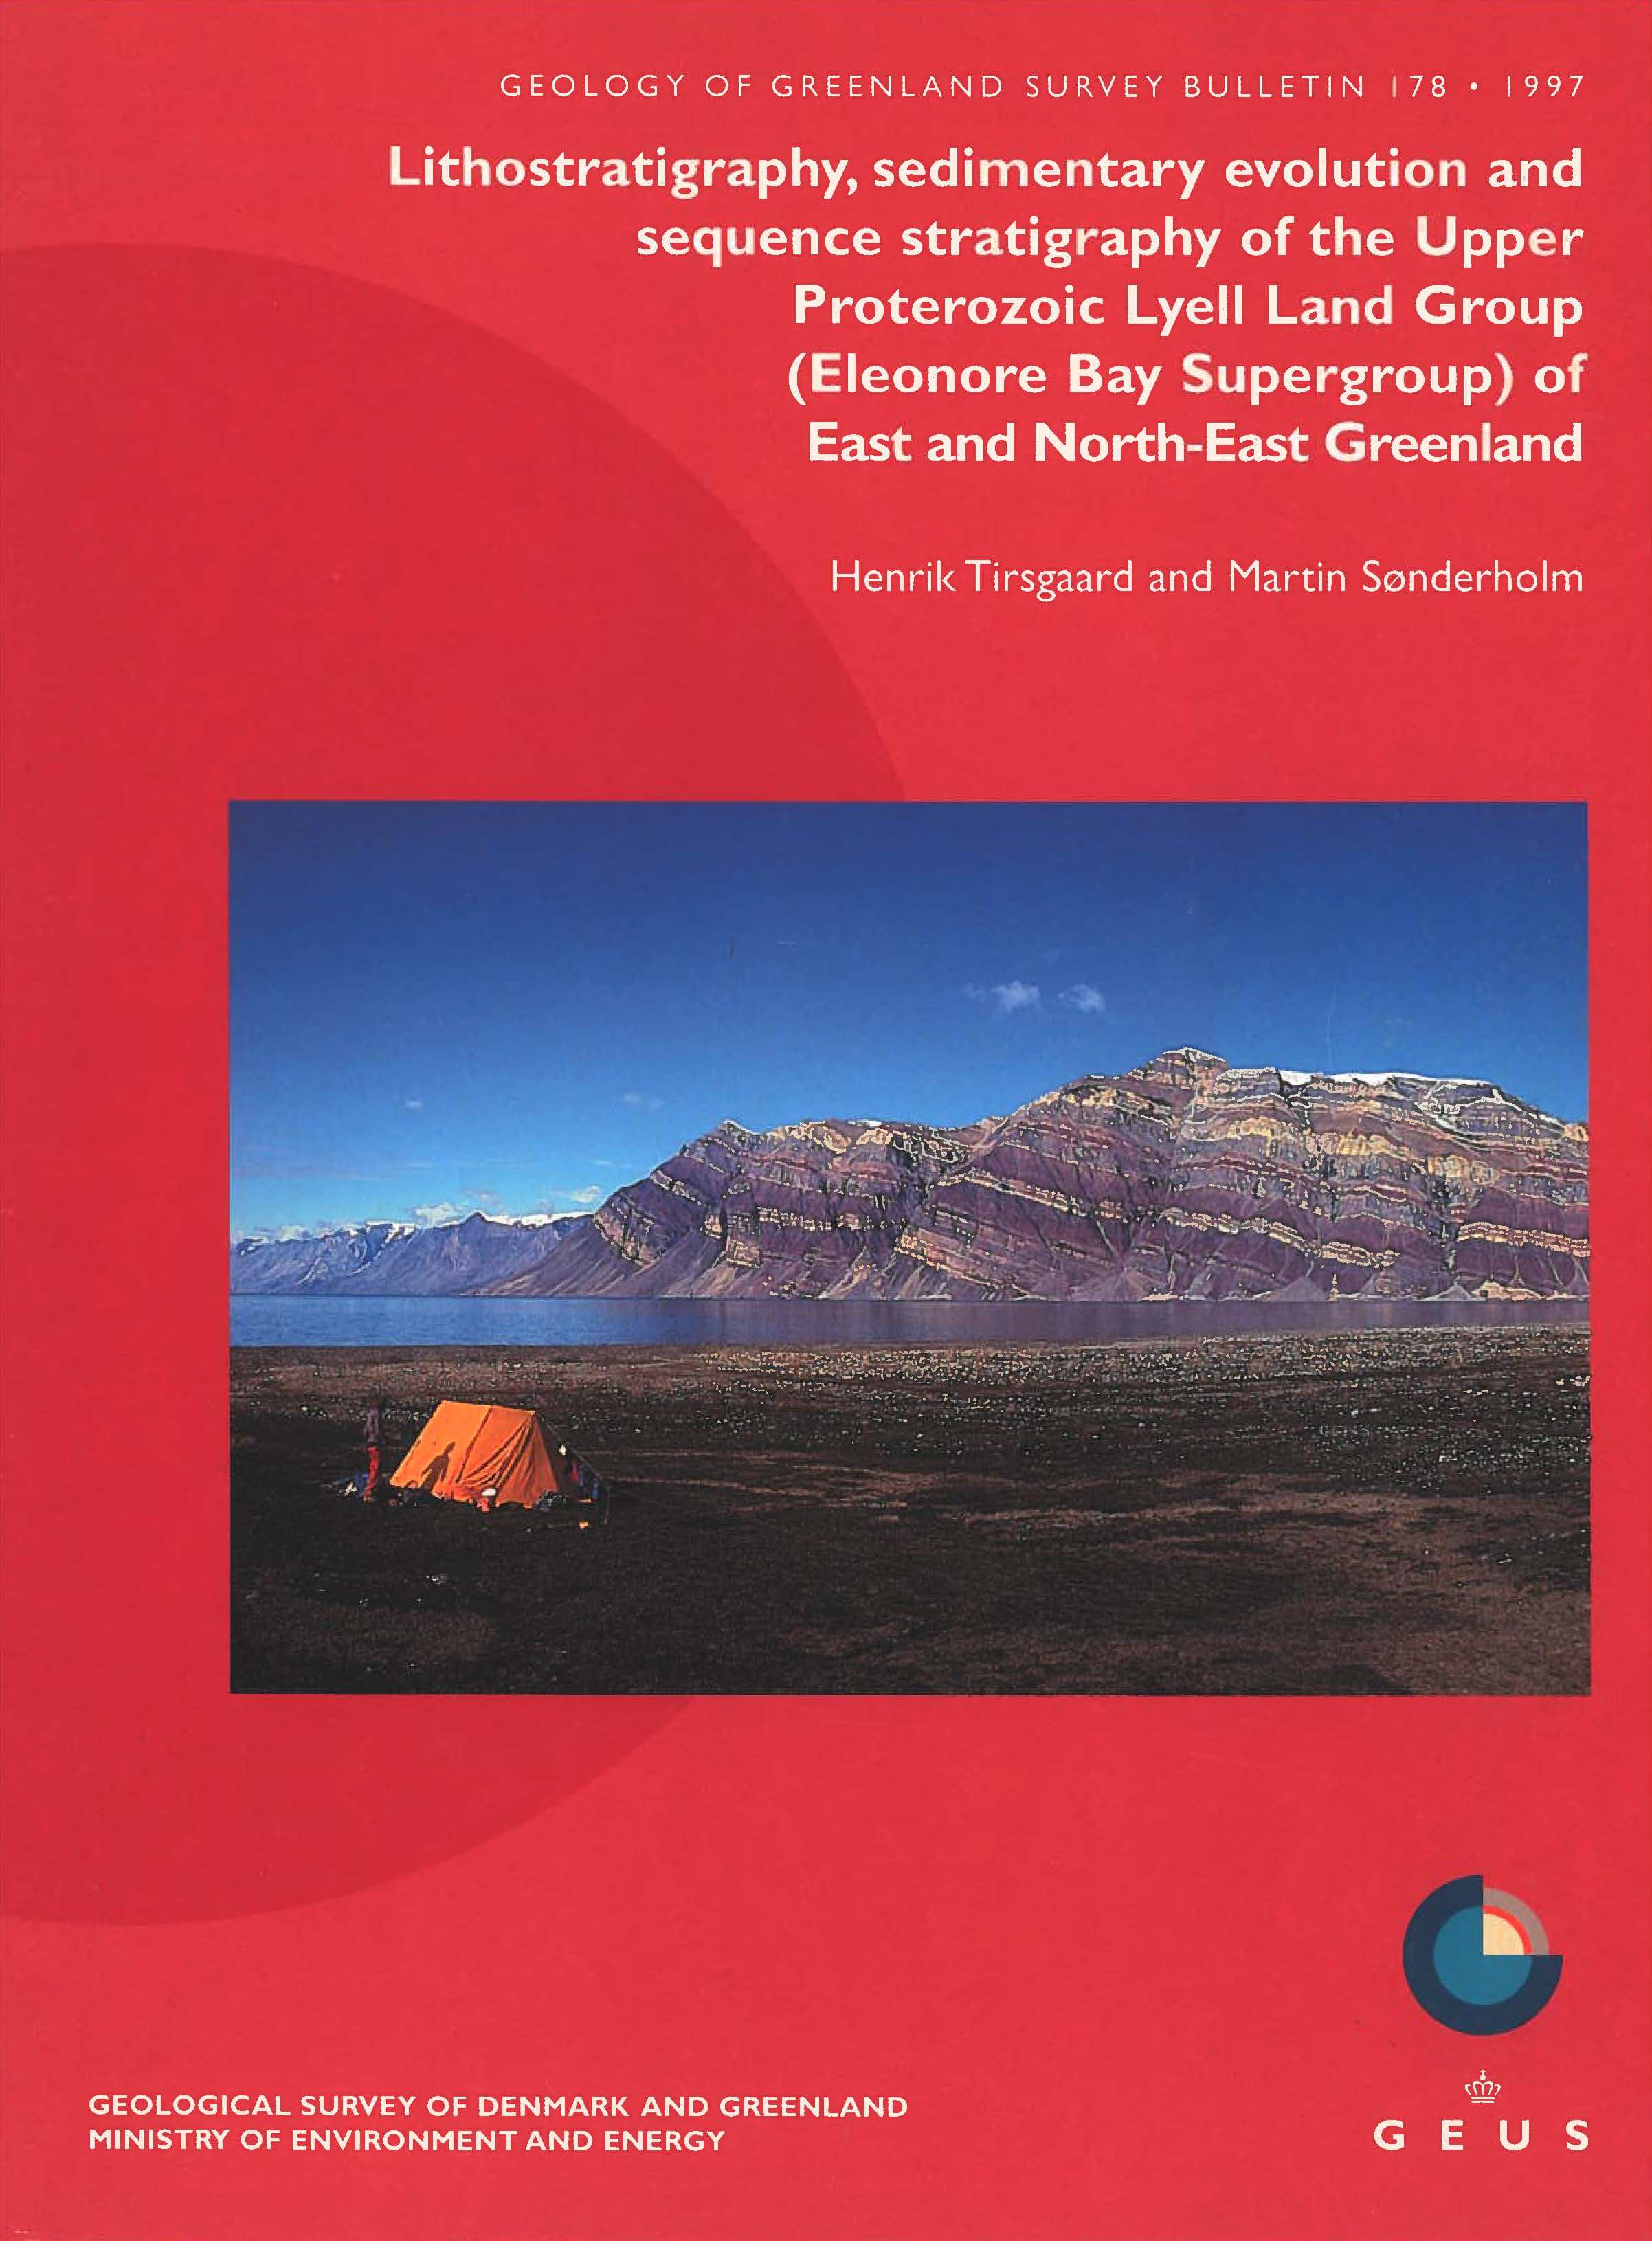 Geology of Greenland Survey Bulletin 178 cover tent in front of mountains